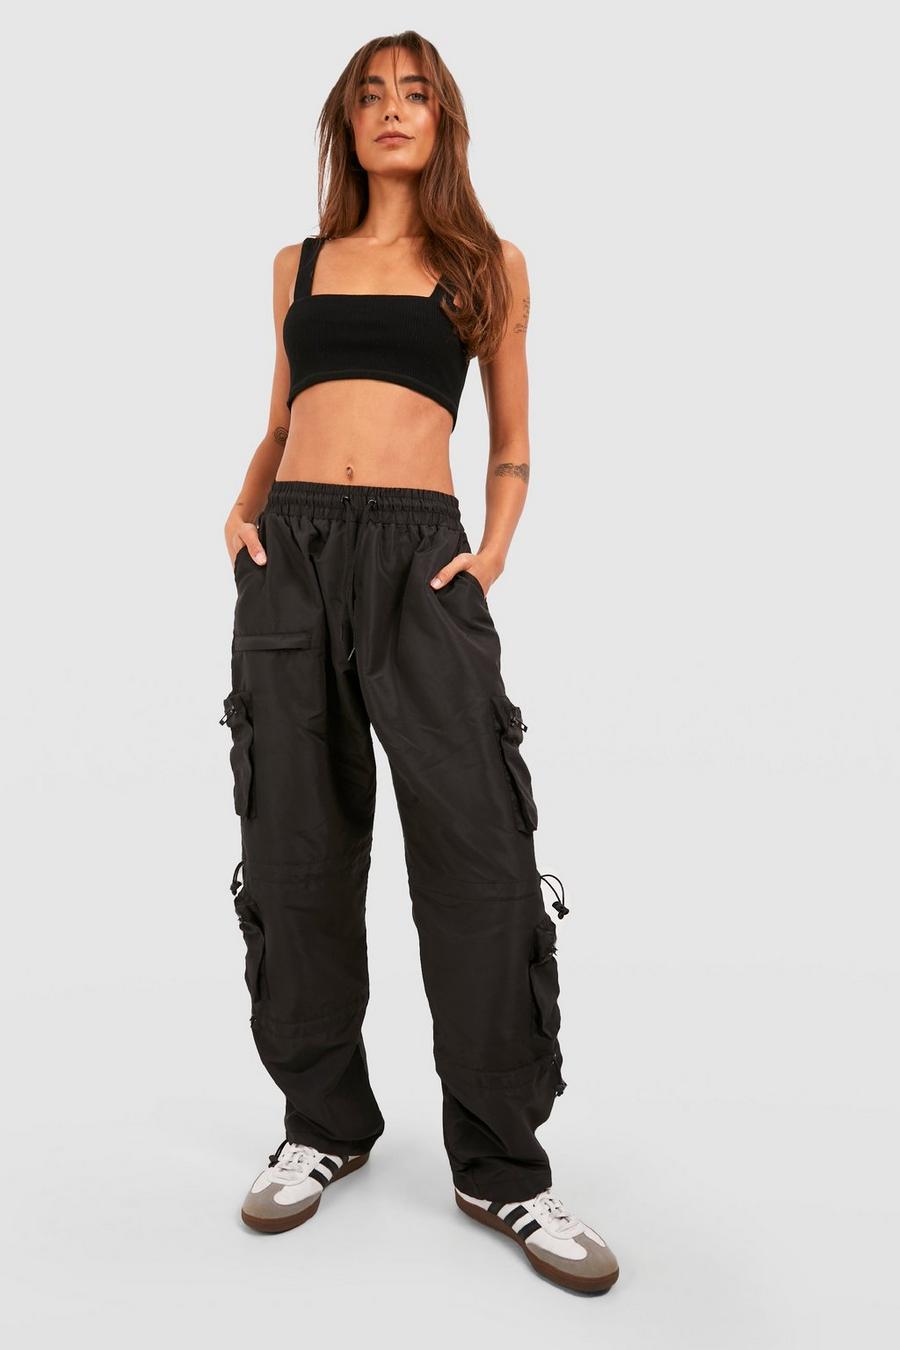 Black and Friday Deals VBXOAE Cargo Pants for Women Casual Pants